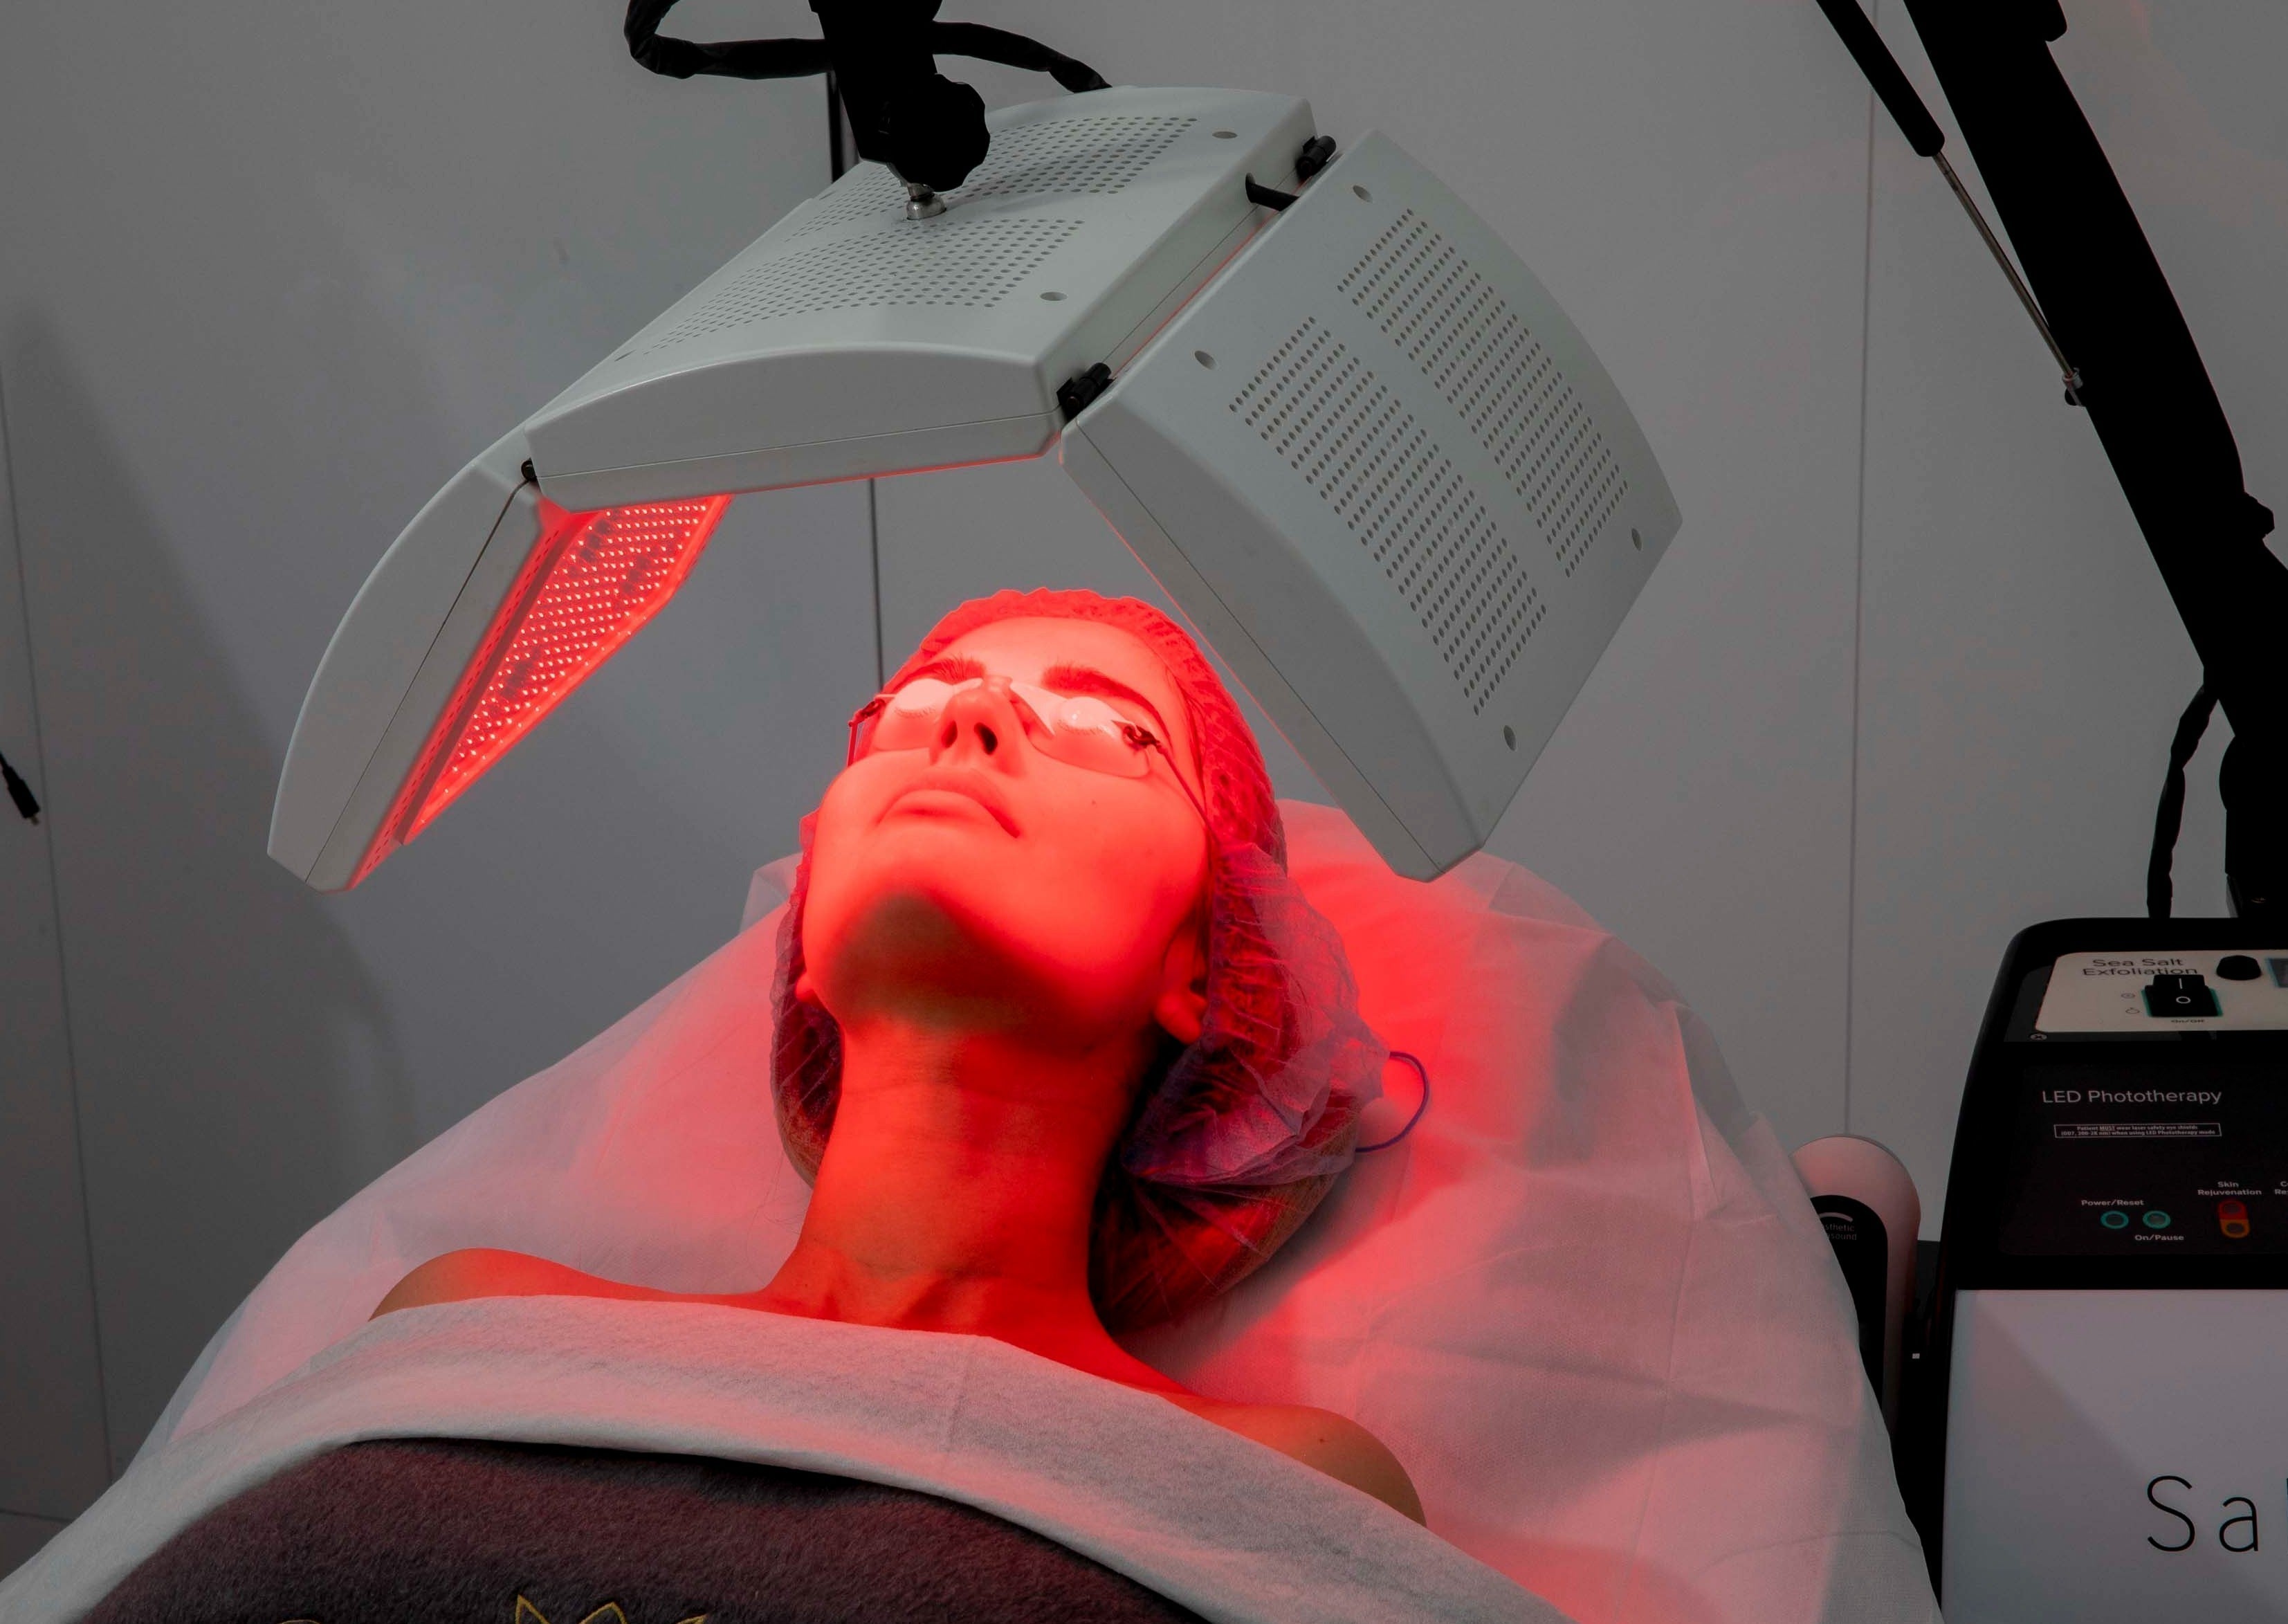 LED Light Therapy Skin Rejuvenation course of 10 (save €251)